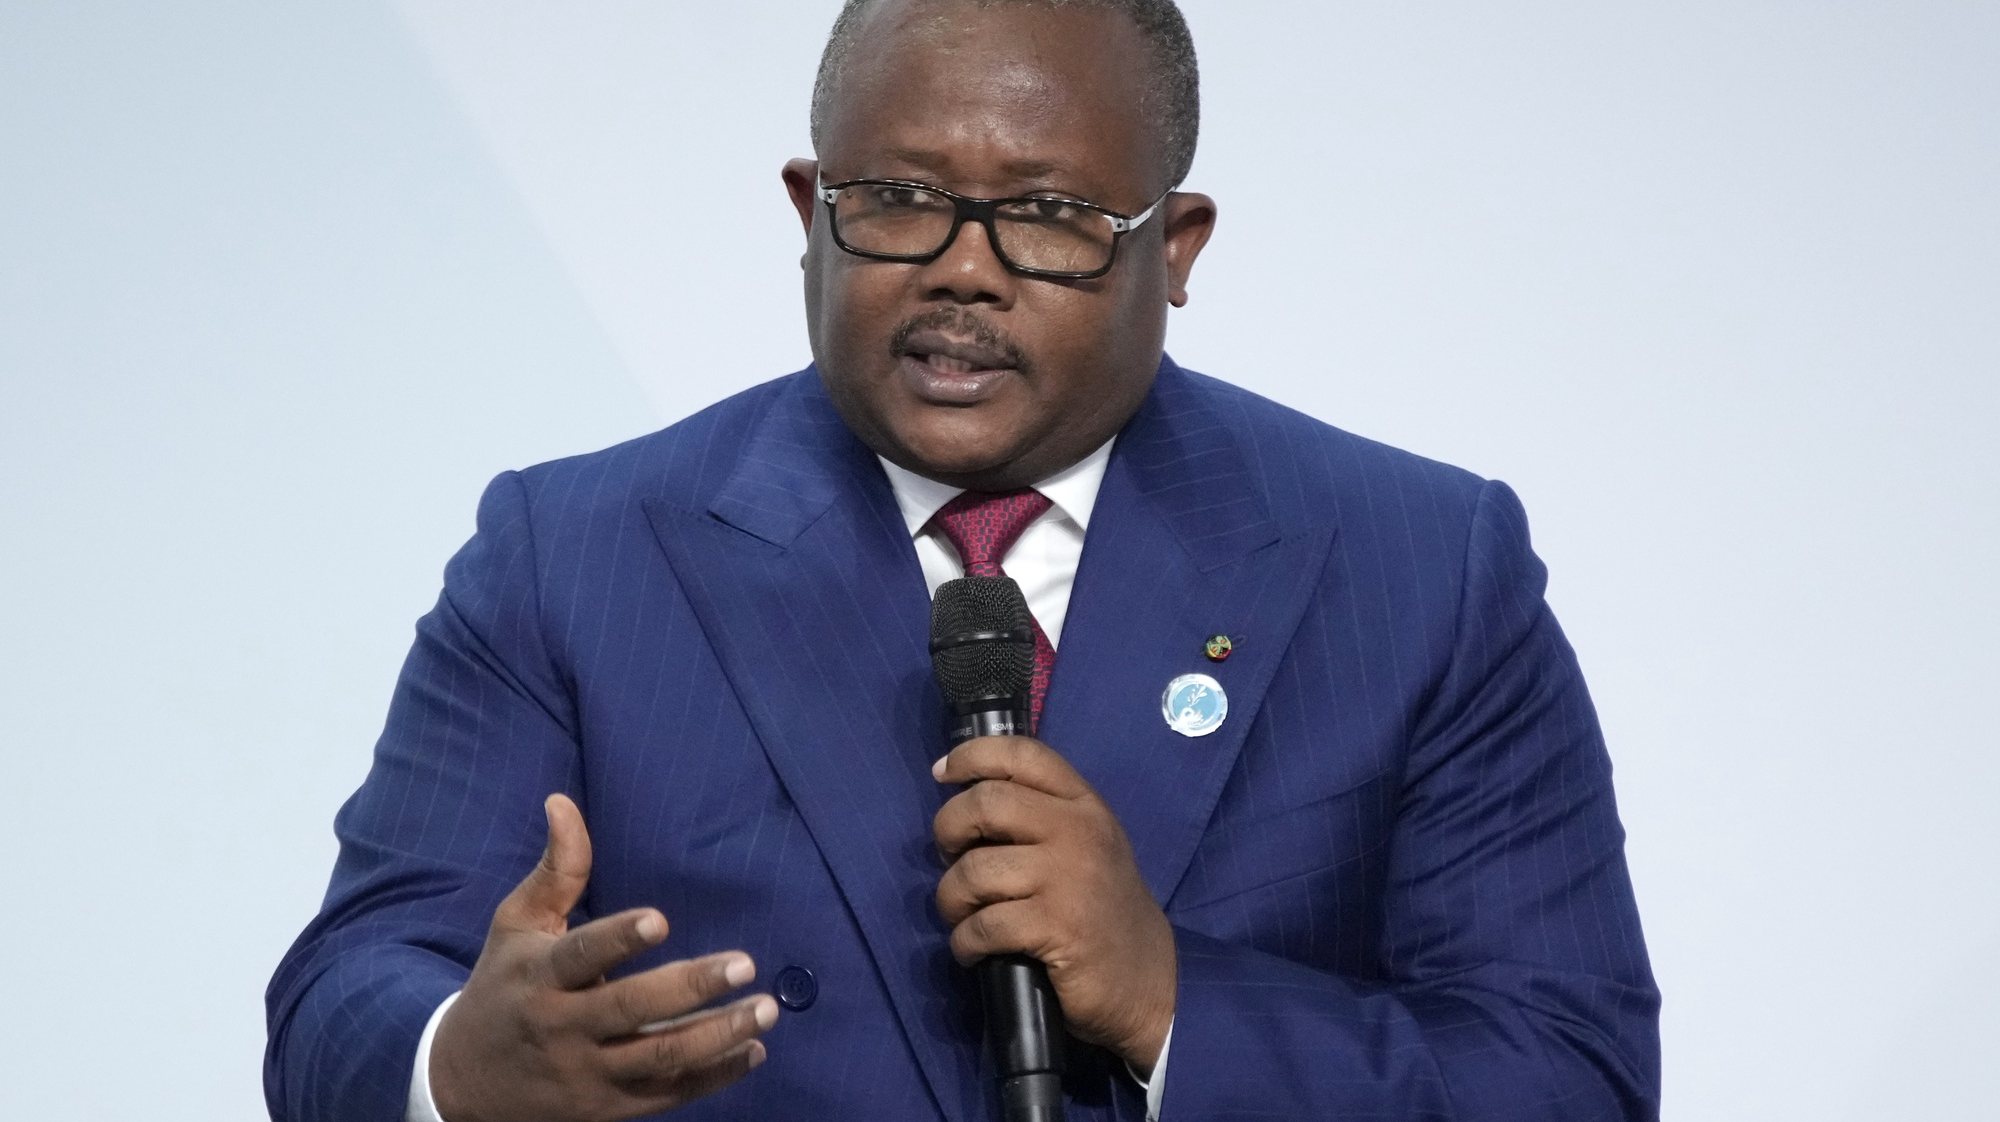 epa10300141 Guinea Bissau President Umaro Sissoco Embalo speaks at the Peace Forum in Paris, France, 11 November 2022. France hosts leaders from multiple countries to discuss world peace and what to do about Ukraine  EPA/Christophe Ena / POOL MAXPPP OUT